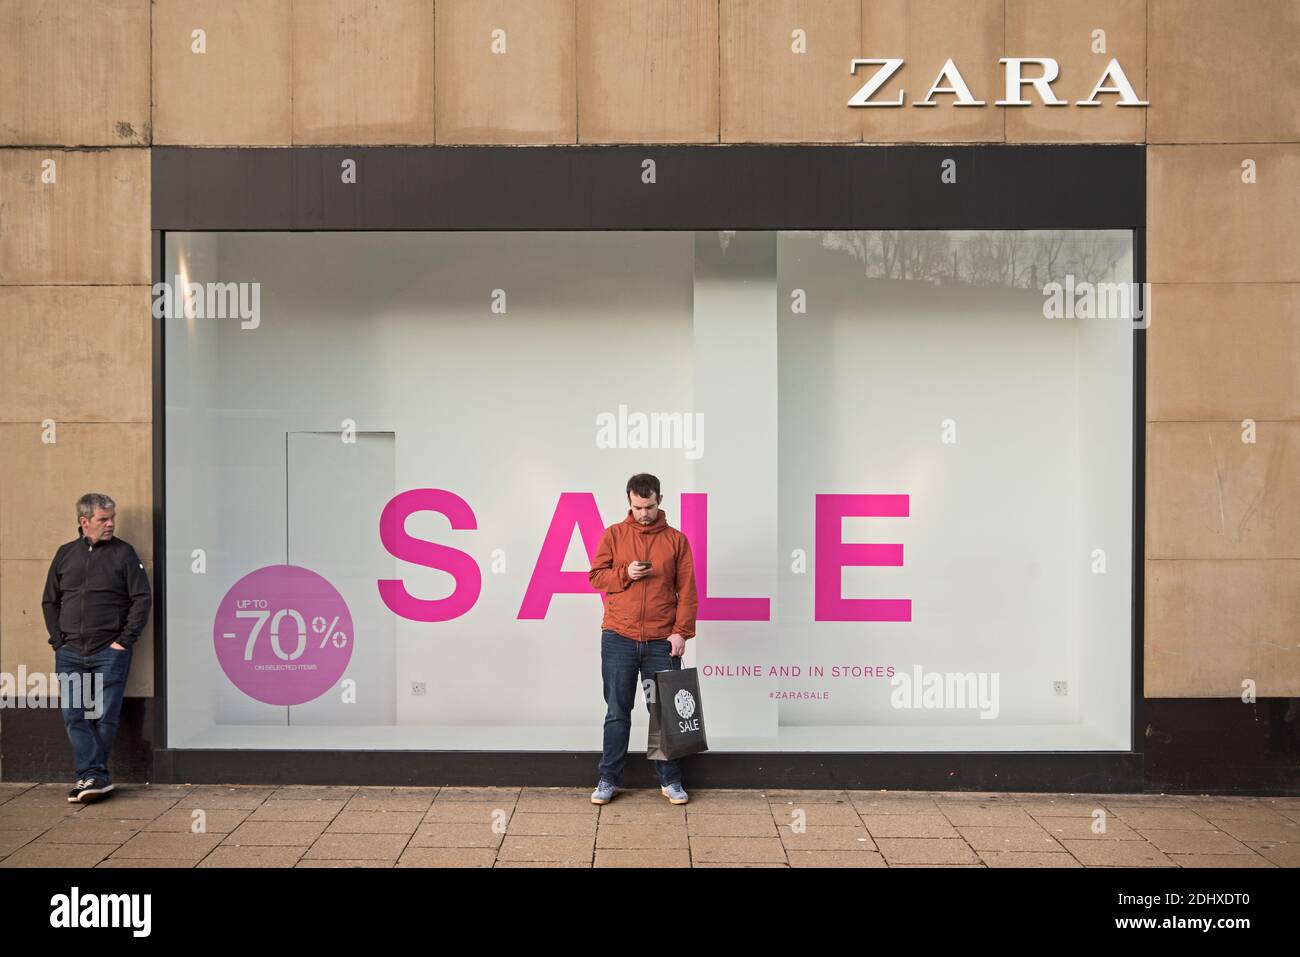 Zara Sale High Resolution Stock Photography and Images - Alamy